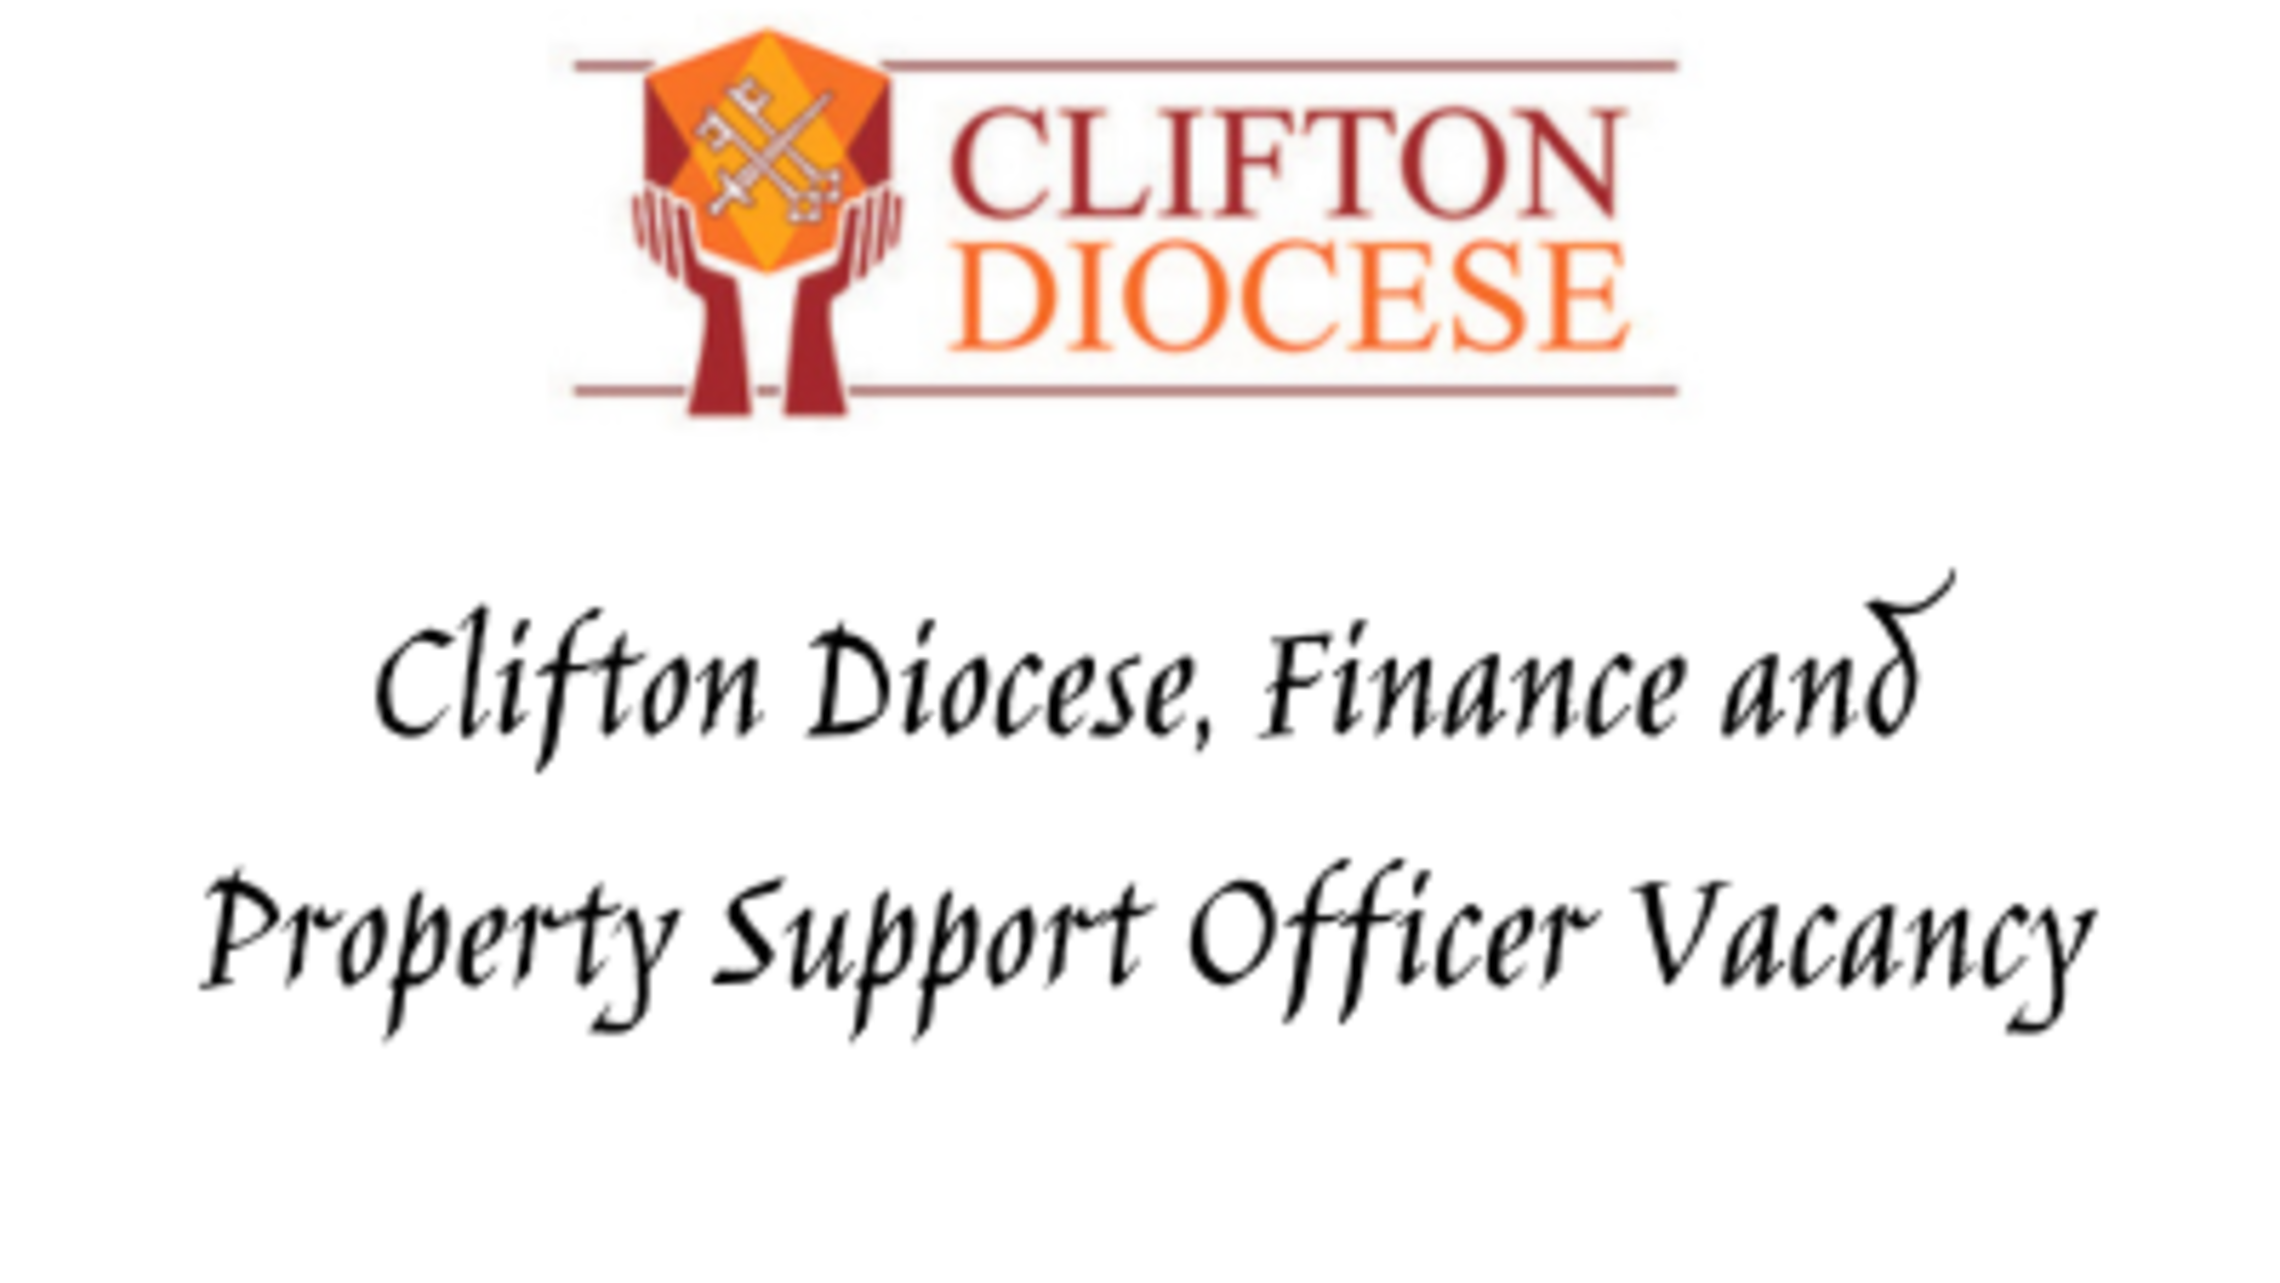 Clifton Diocese Finance And Property Support Officer Vacancy